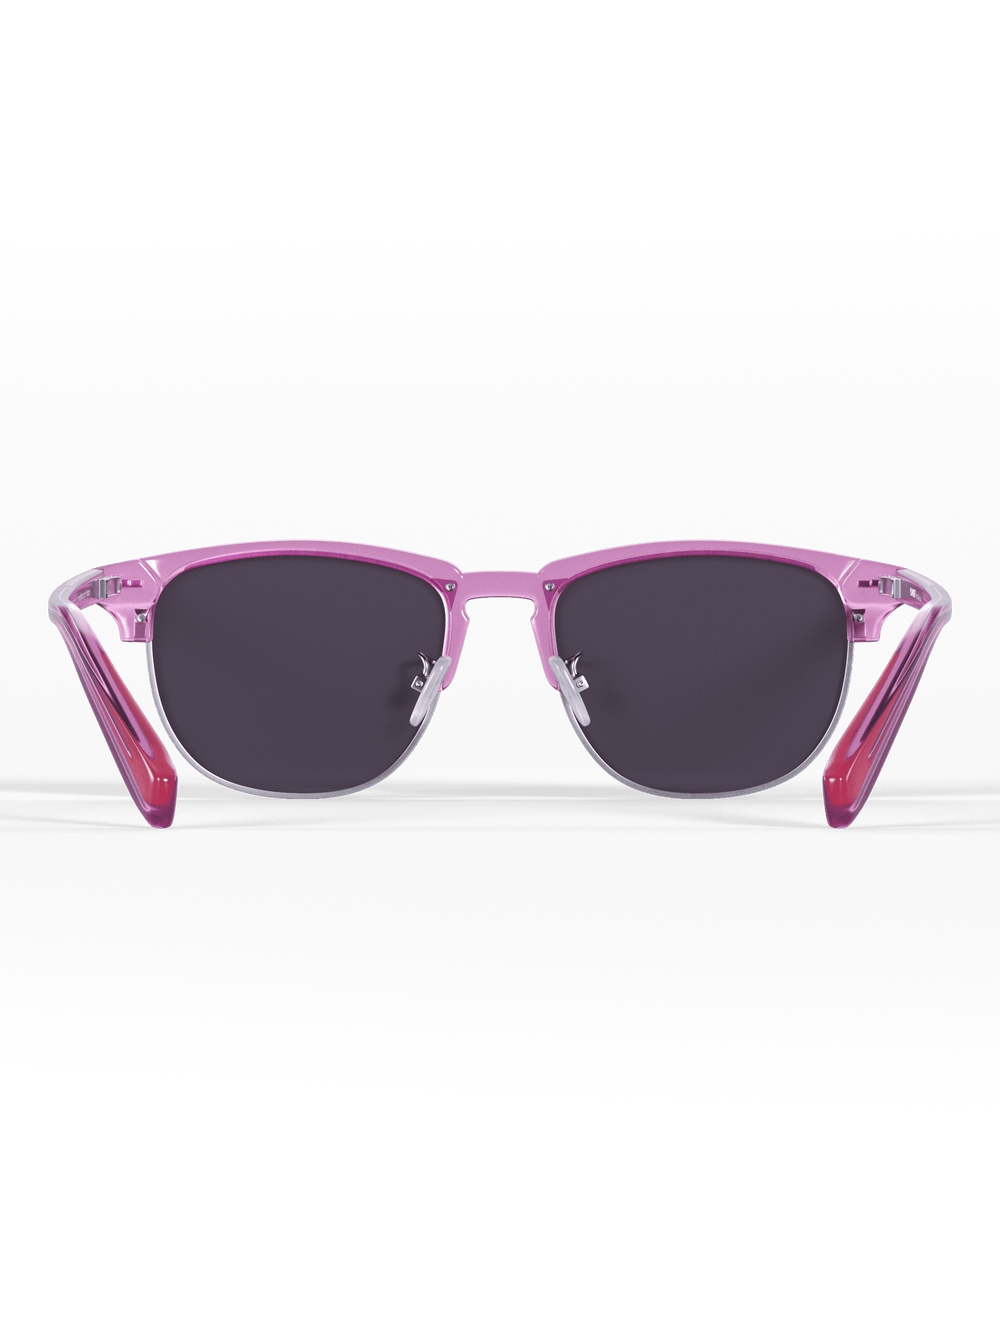 Clear Lilac Semi Rimless - Runner's Athletics